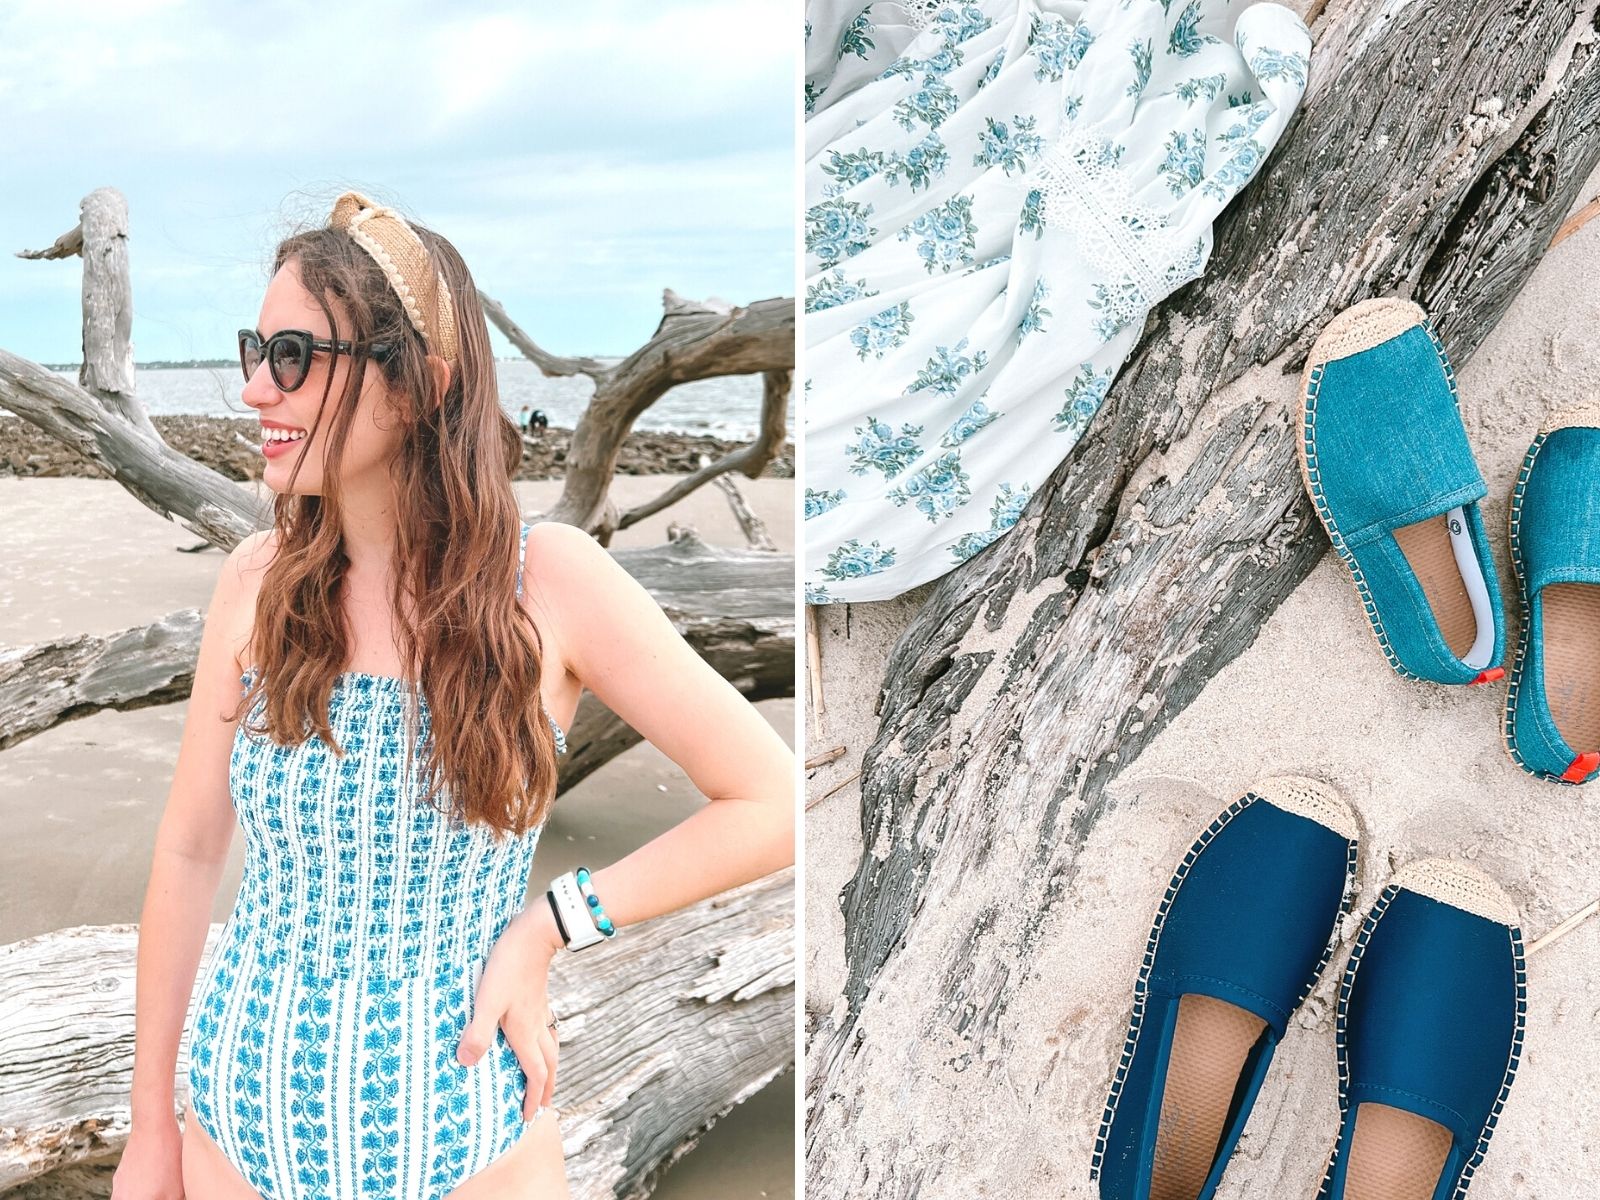  Blue and White One Piece Swimsuit + Sea Star Espadrilles.